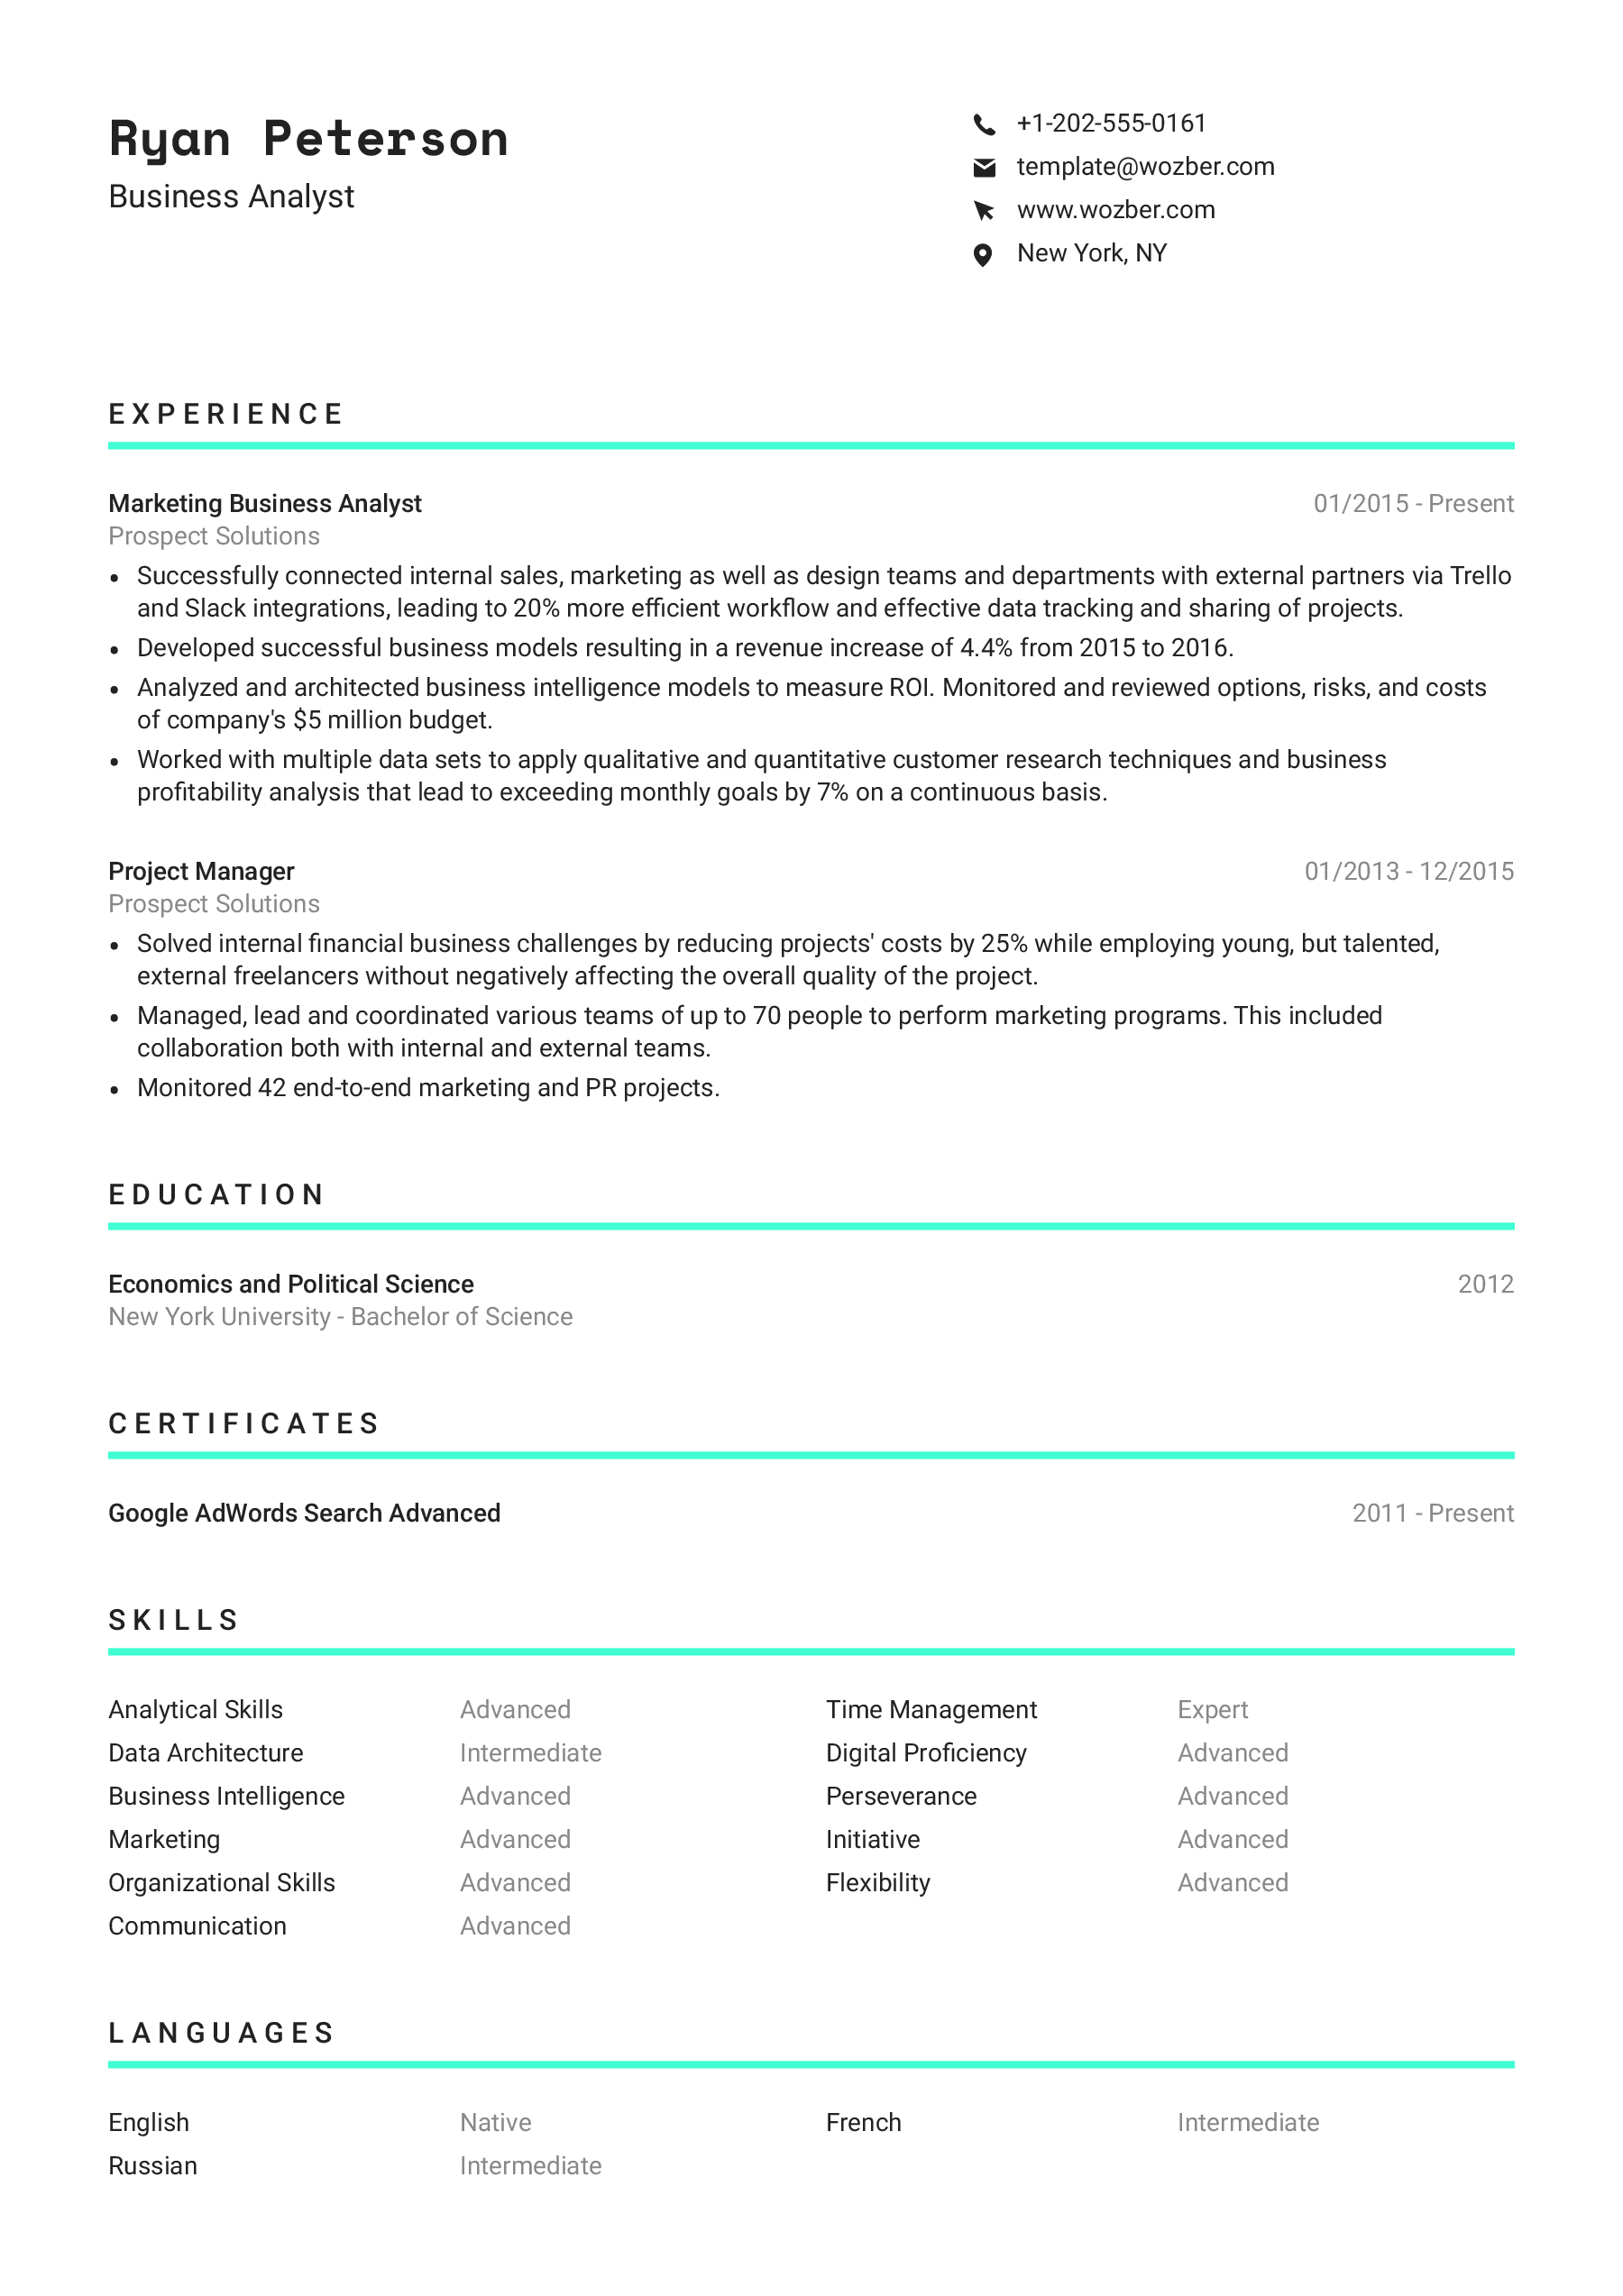 A single-column, creative yet ATS-friendly resume template for those who seek a bold and futuristic look.